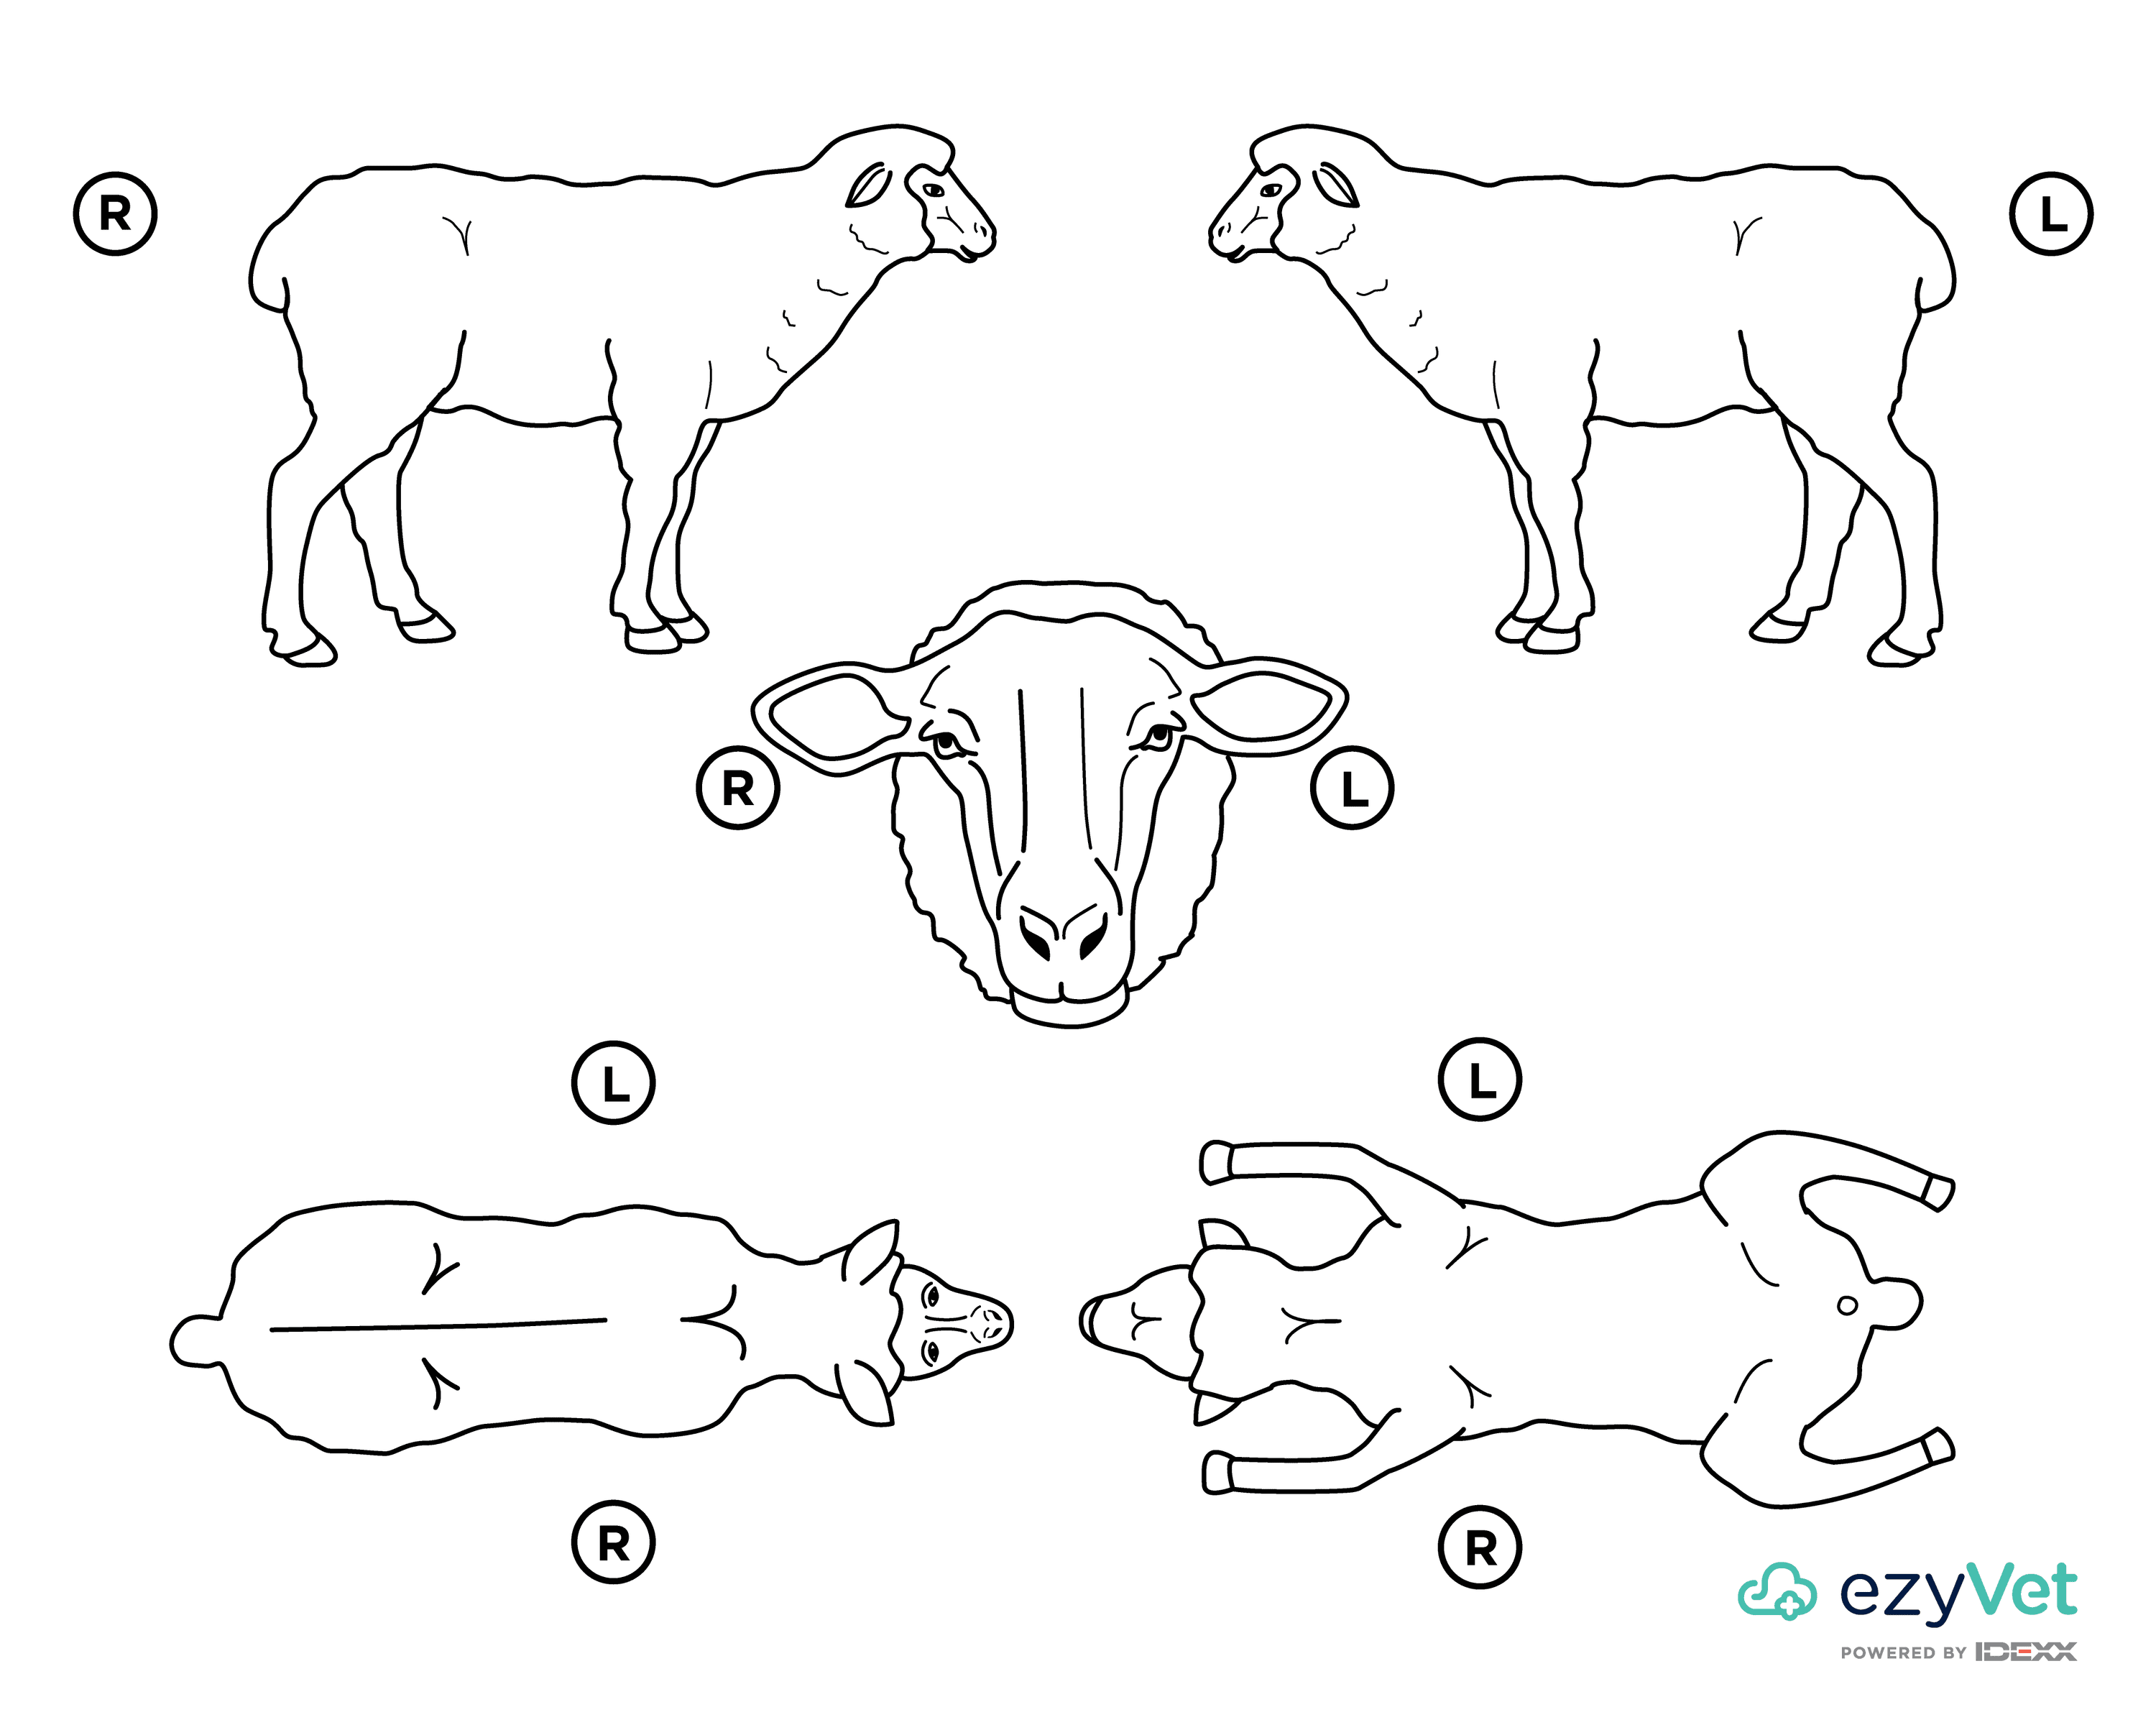 Sheep Ovine Body Map for vets and annotation